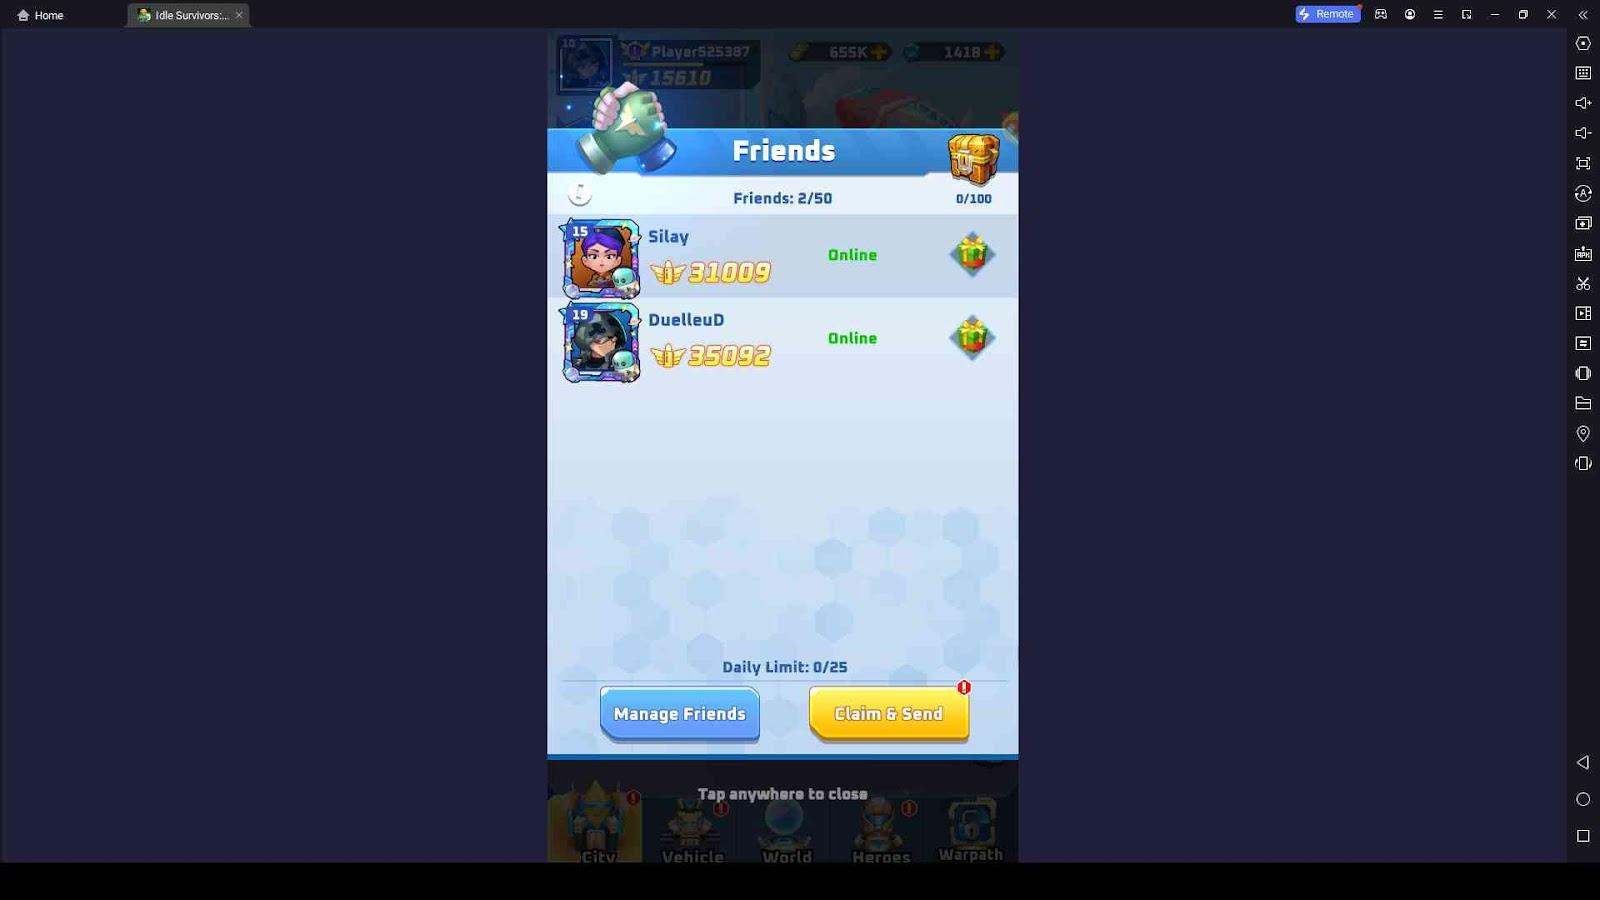 Check Your Friends List Regularly